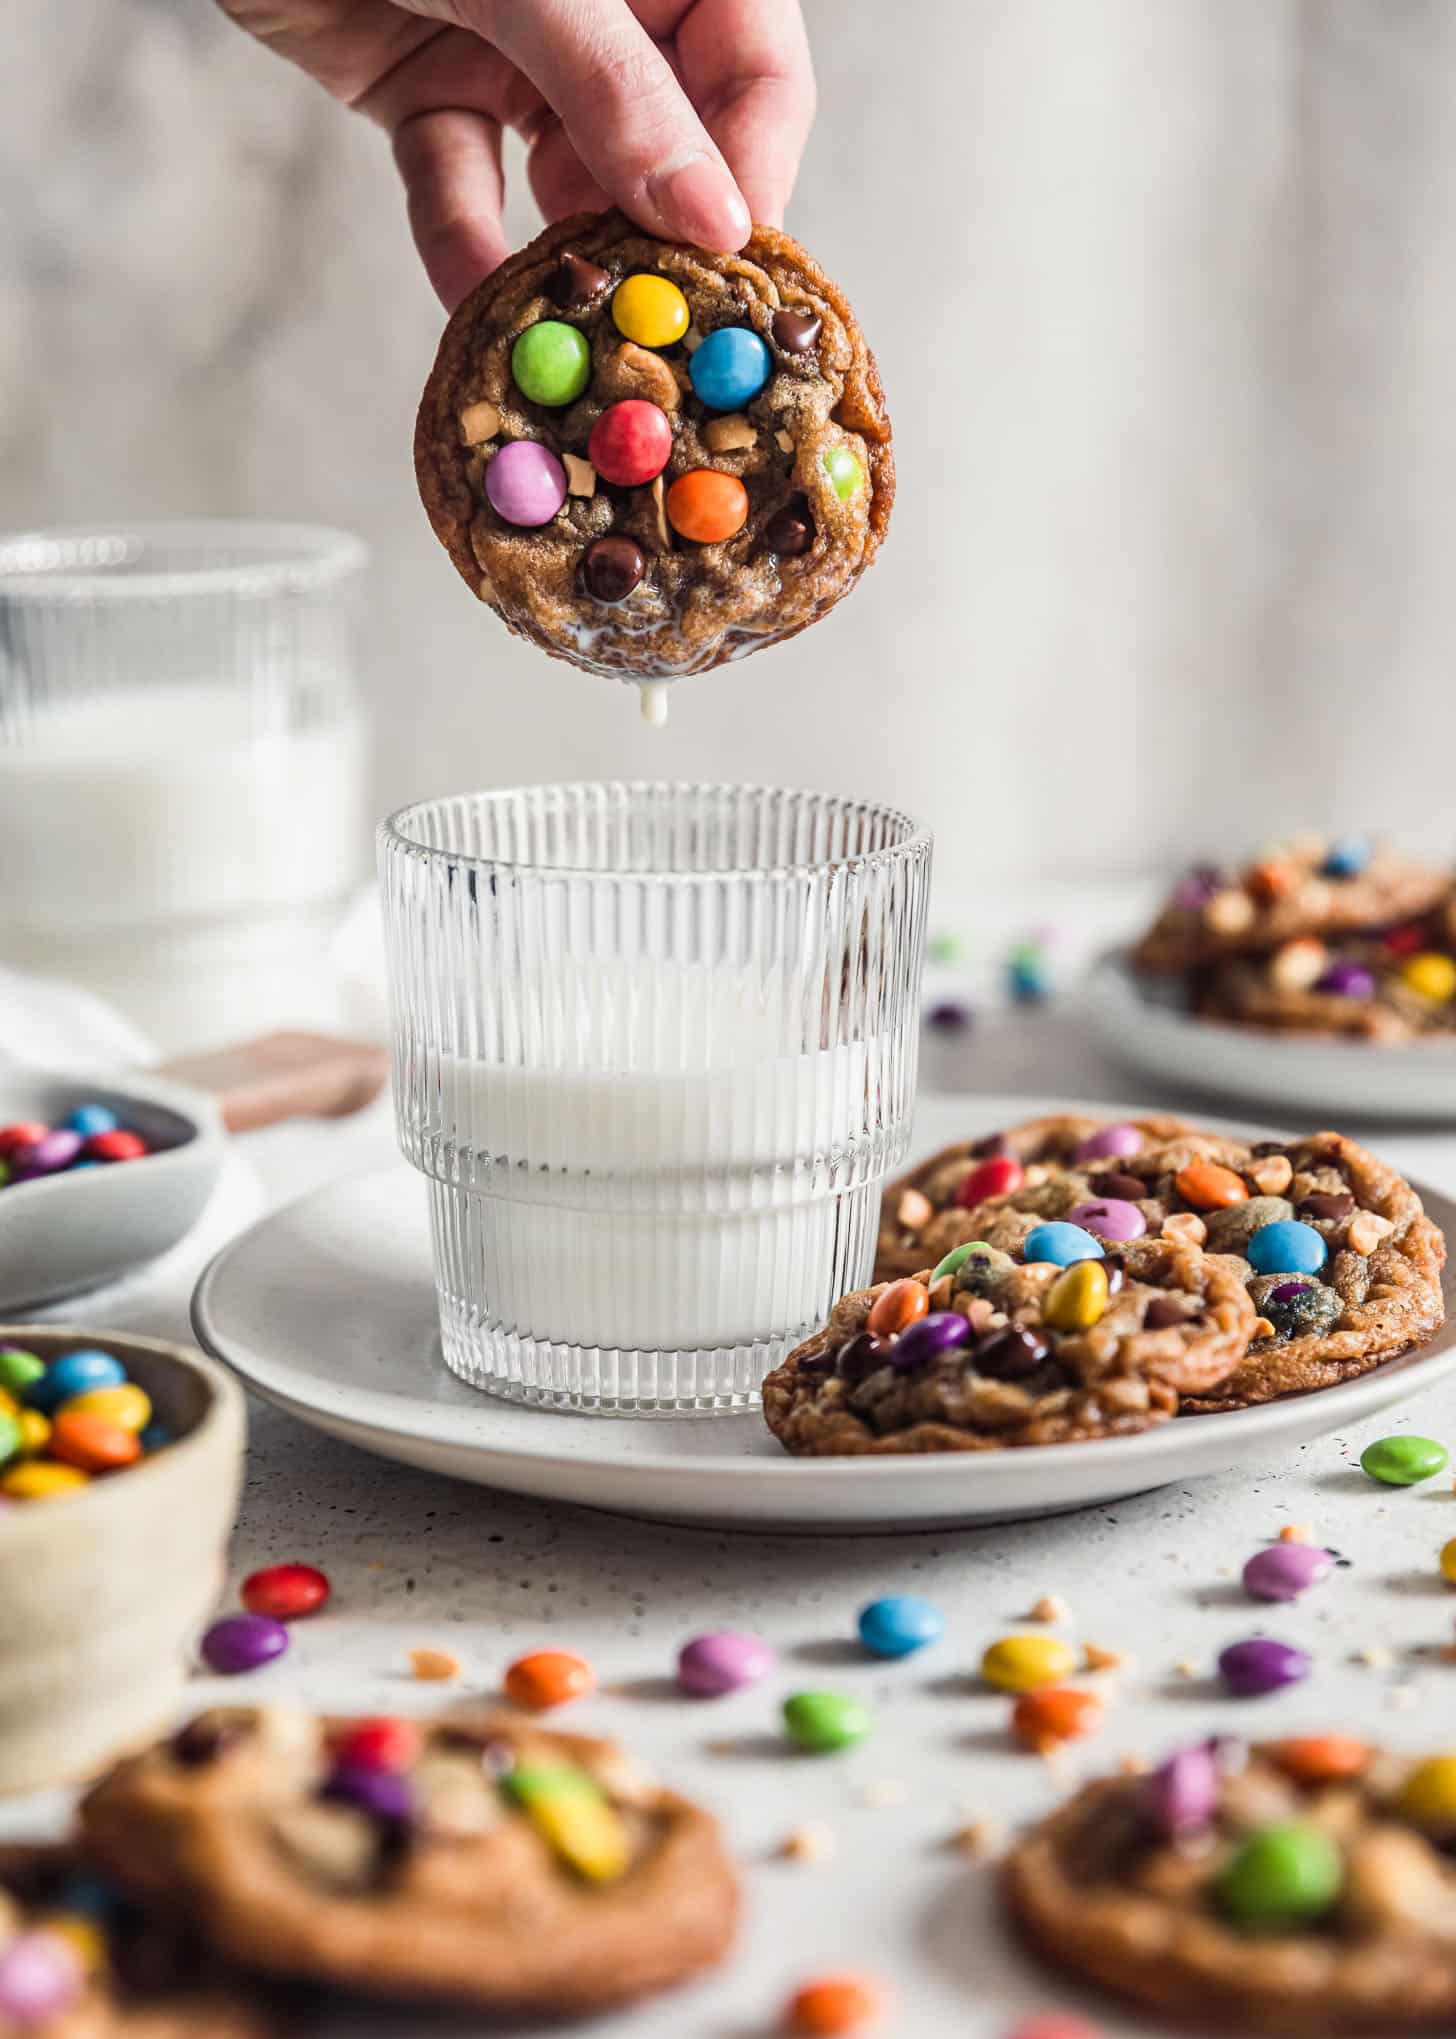 A hand dipping a brown butter peanut M&M cookie into a glass of milk on a white plate next to more cookies with a white and grey background.